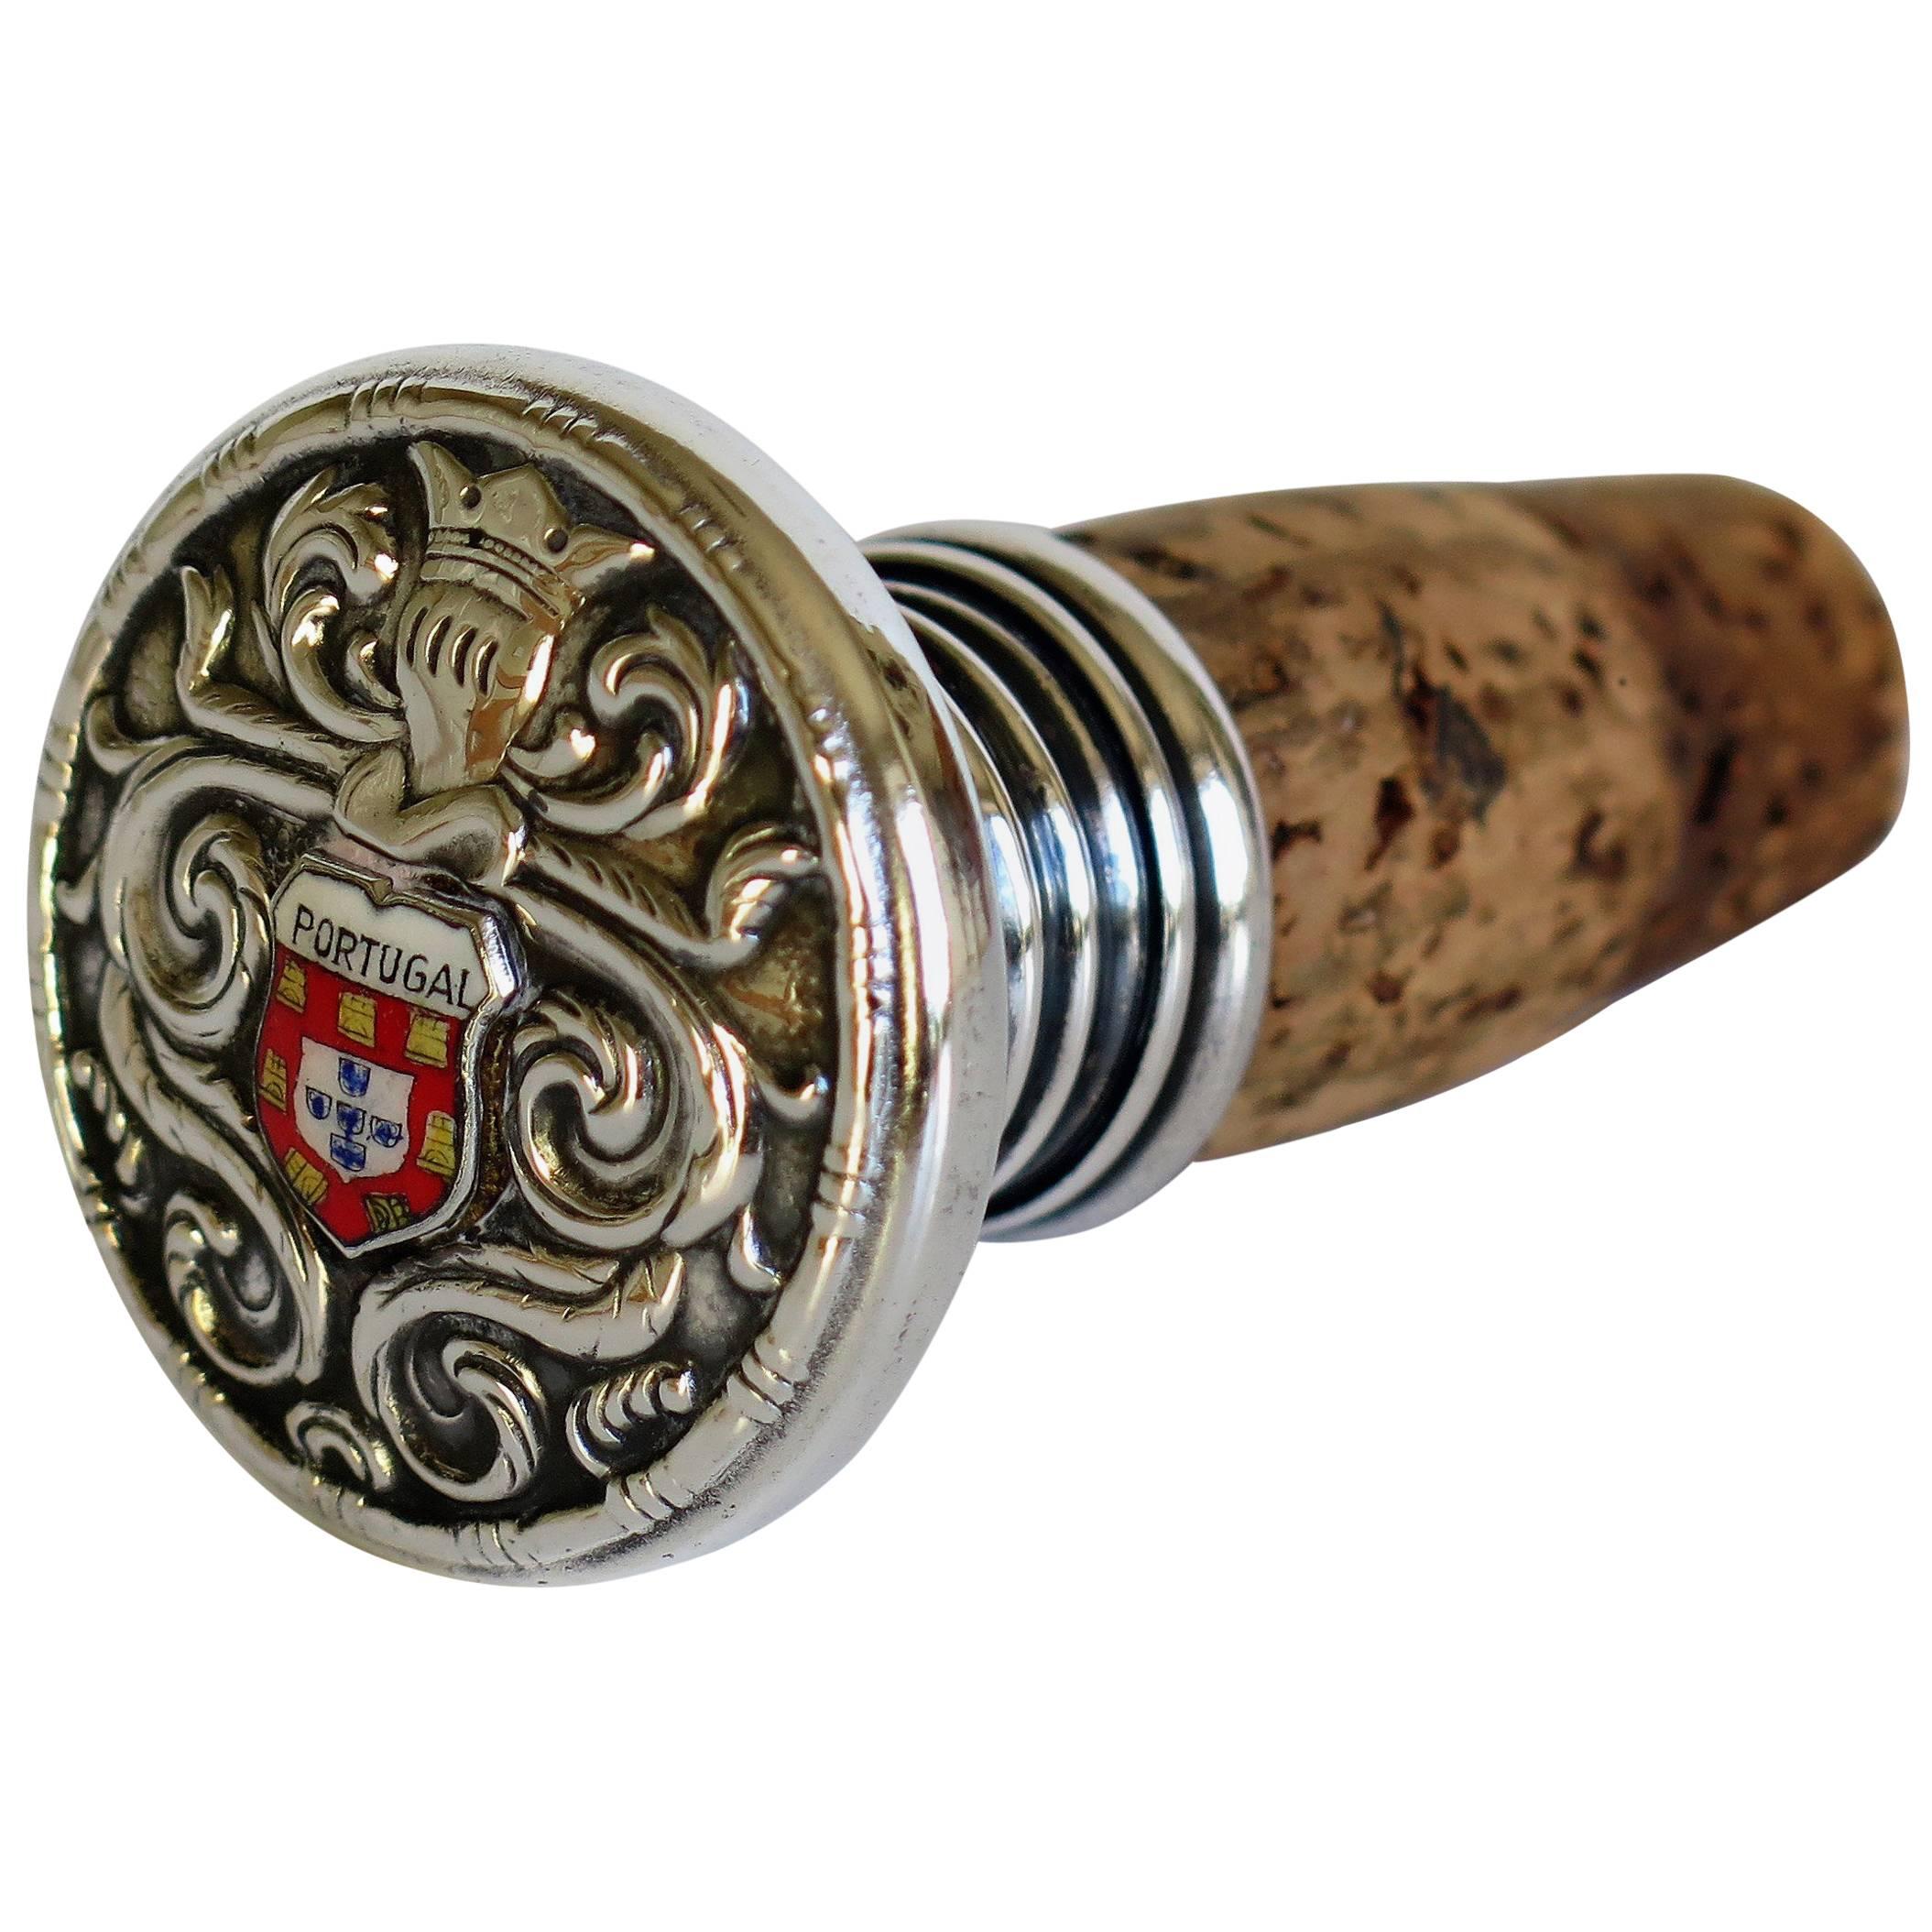 Silver Wine Bottle Stopper with Portugal Coat of Arms and Cork Stopper